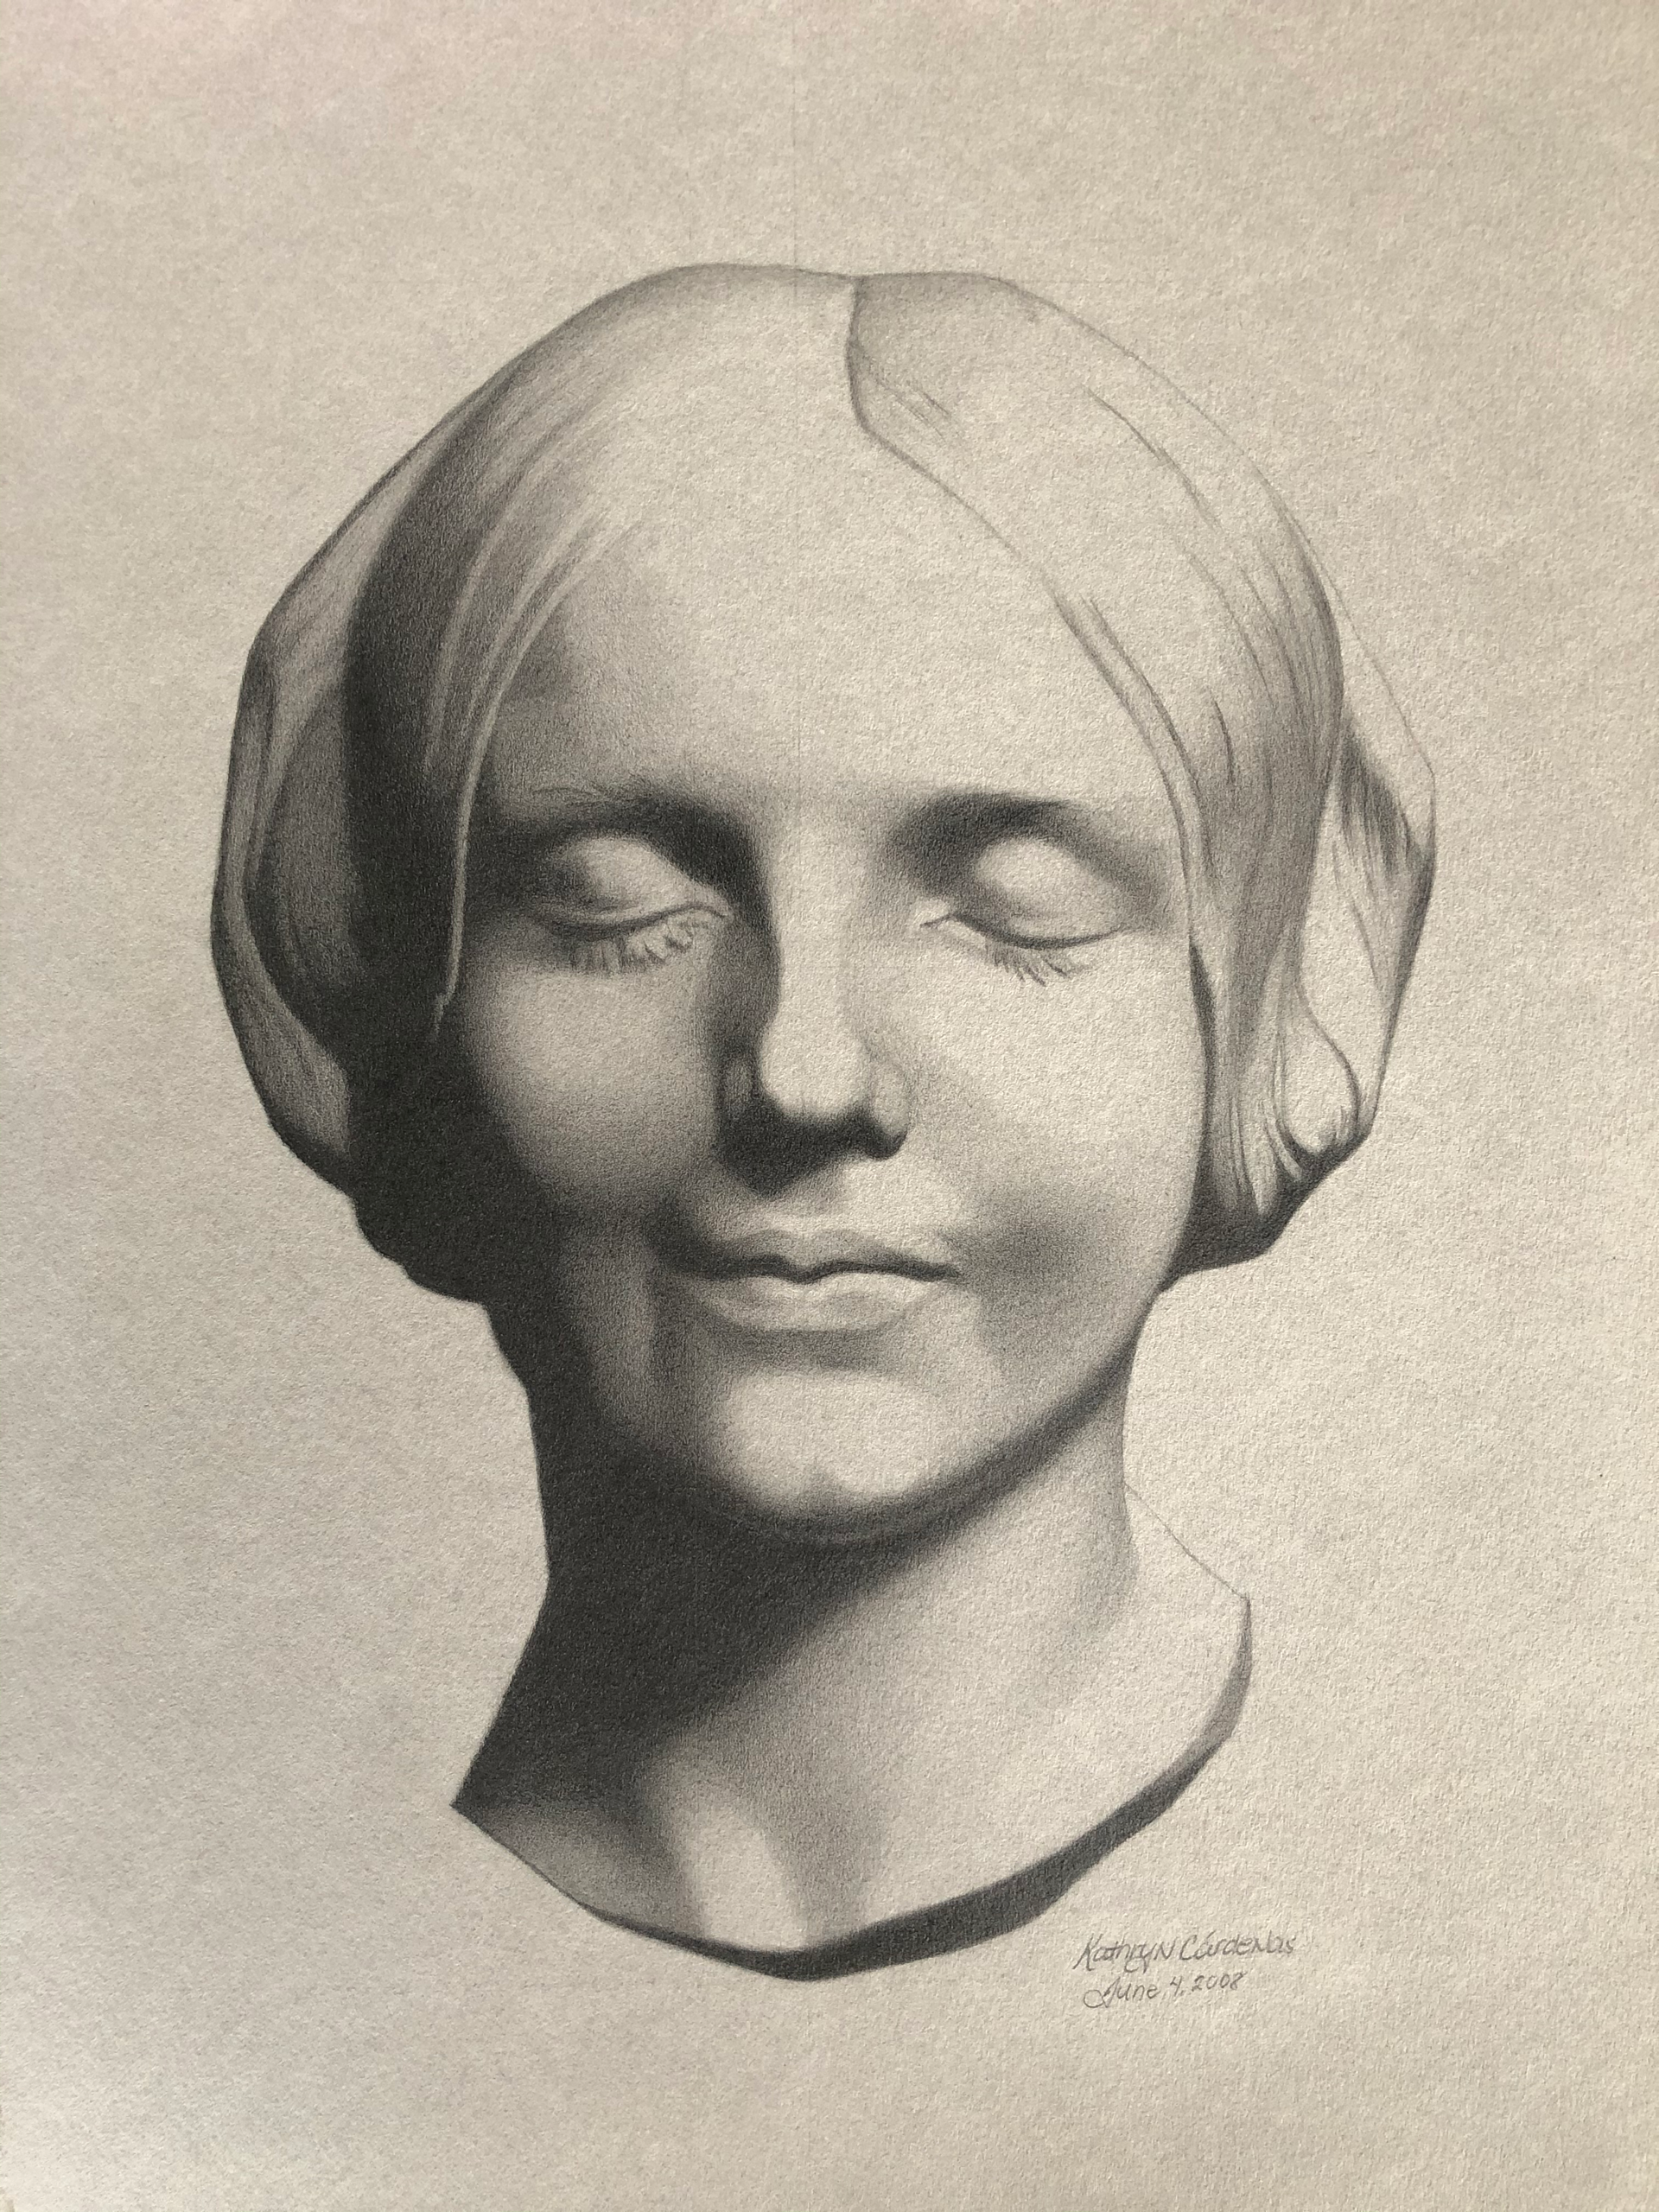 Study of Bargue Plate: "Death Mask of a Girl" (19th century death mask of a drowned girl) by Kathryn Cárdenas